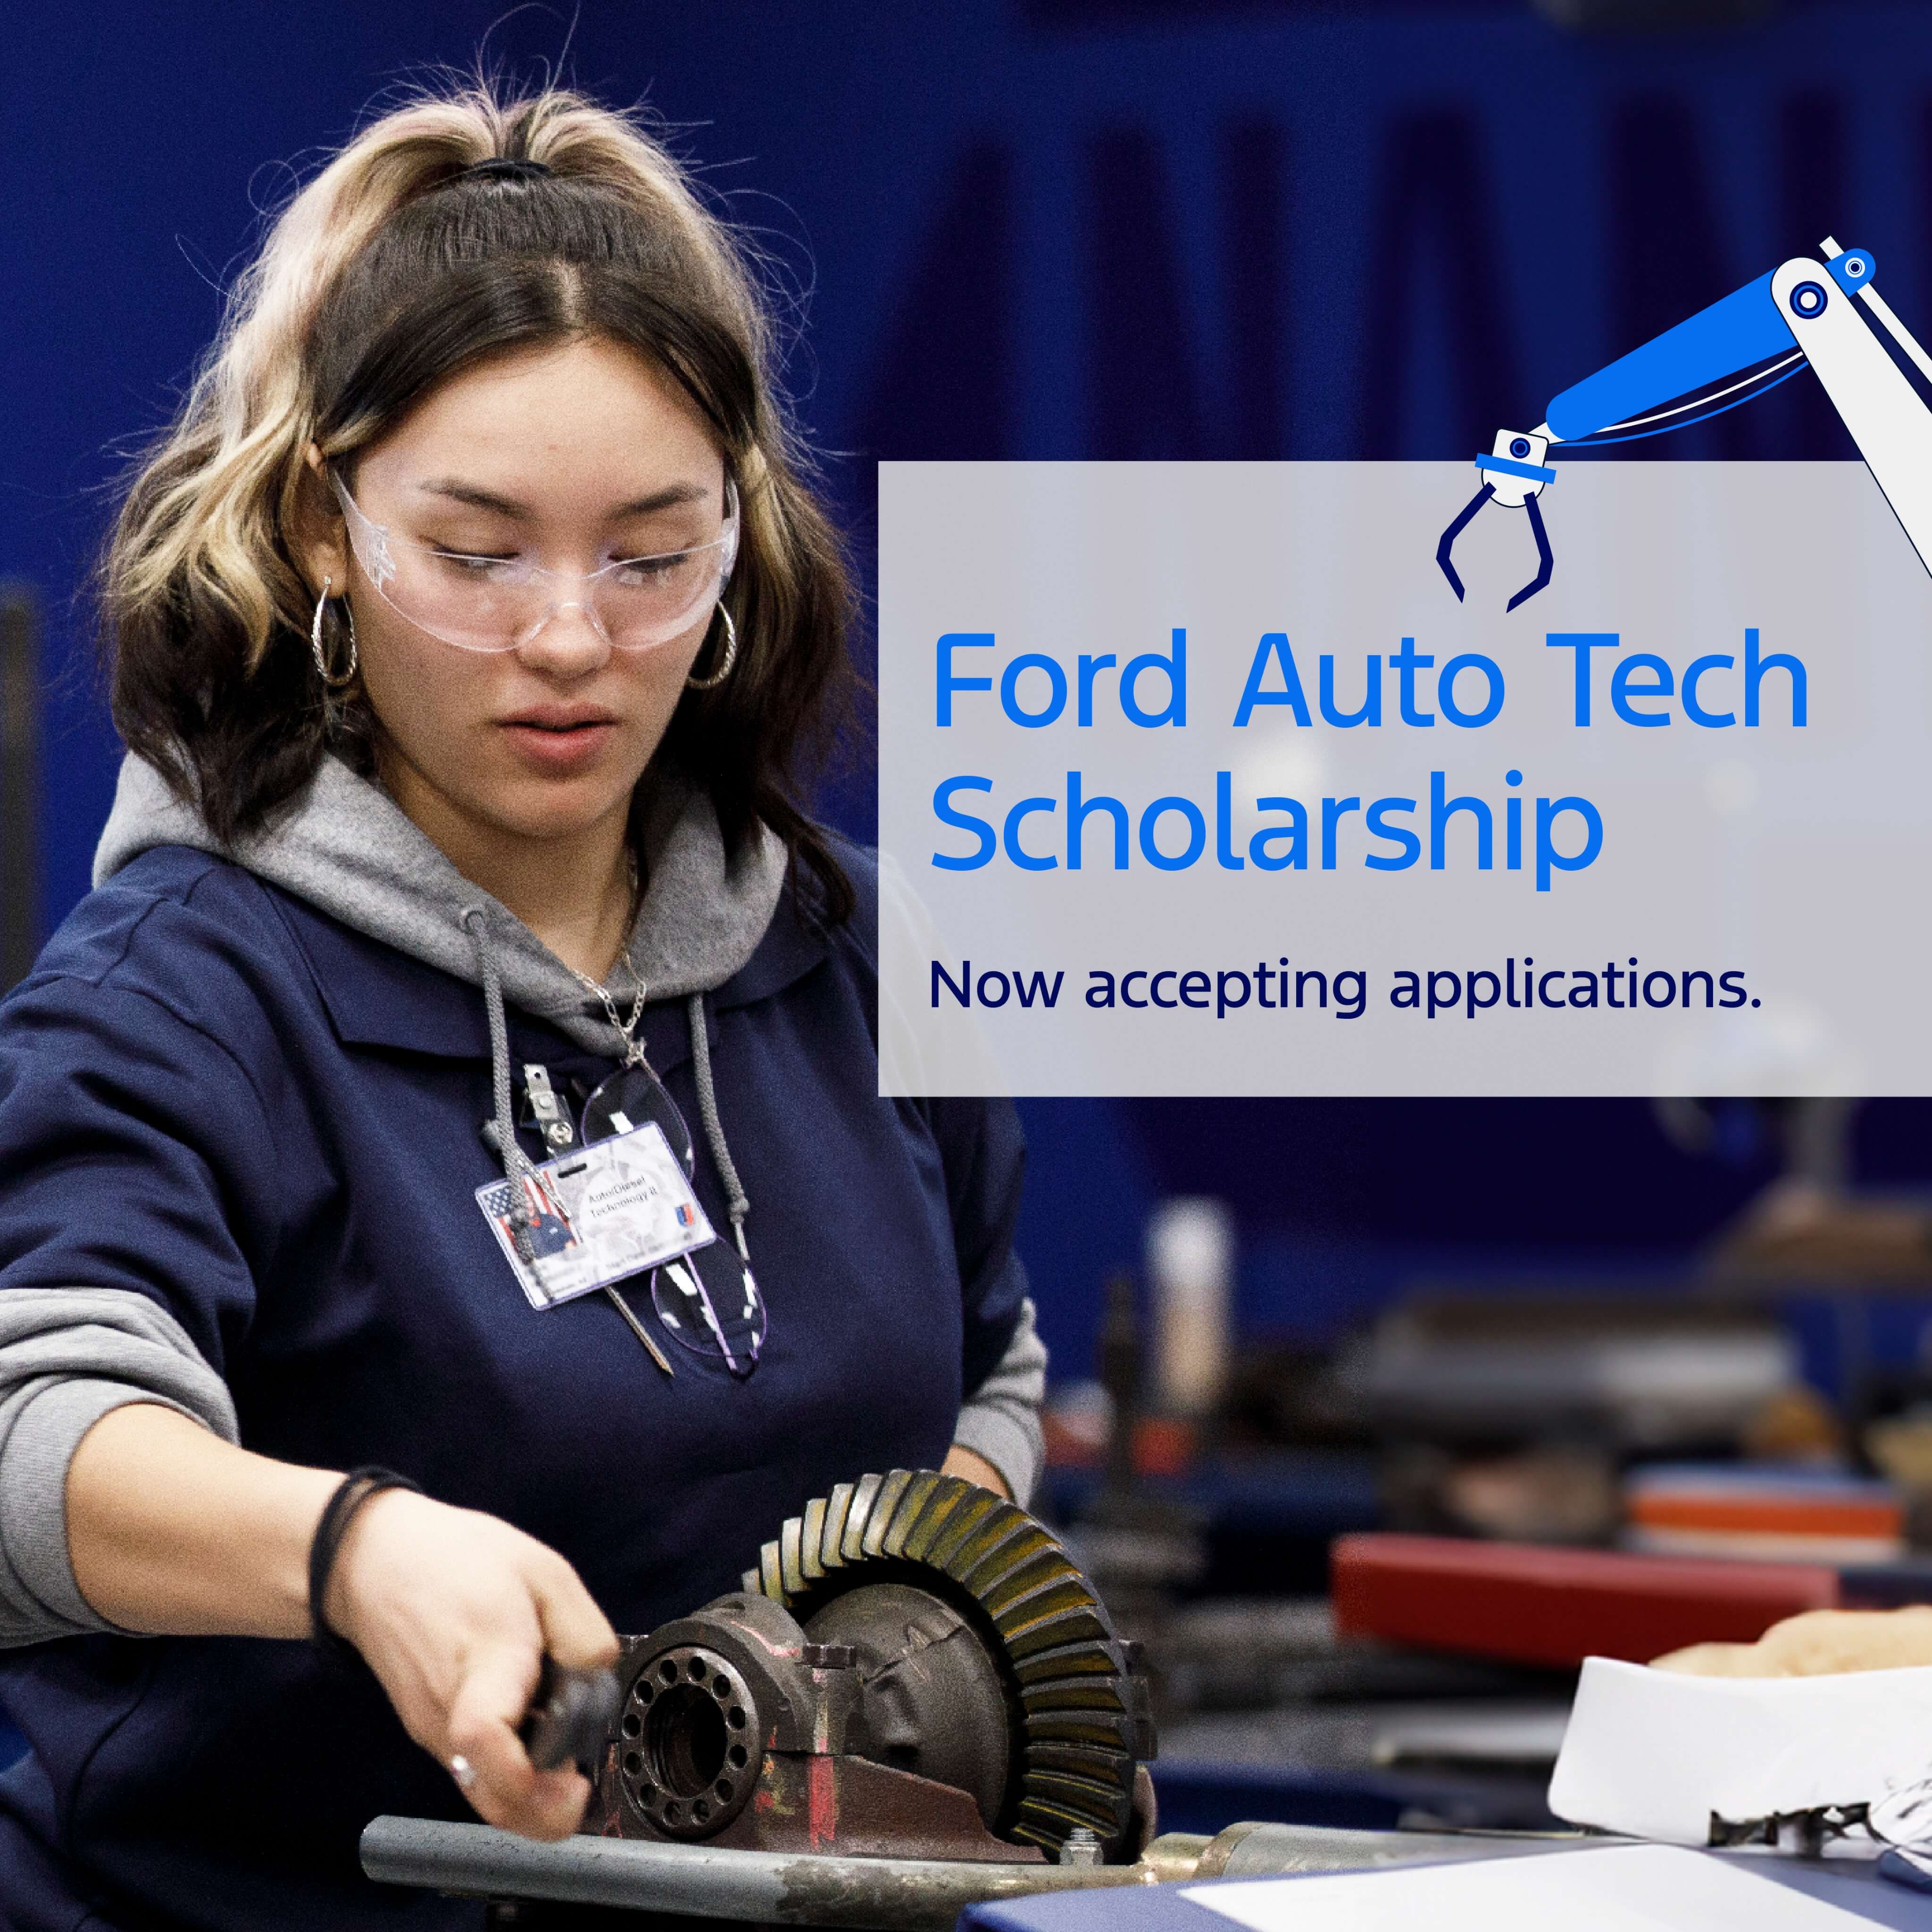 Its a great time to become a Ford Certified Technician